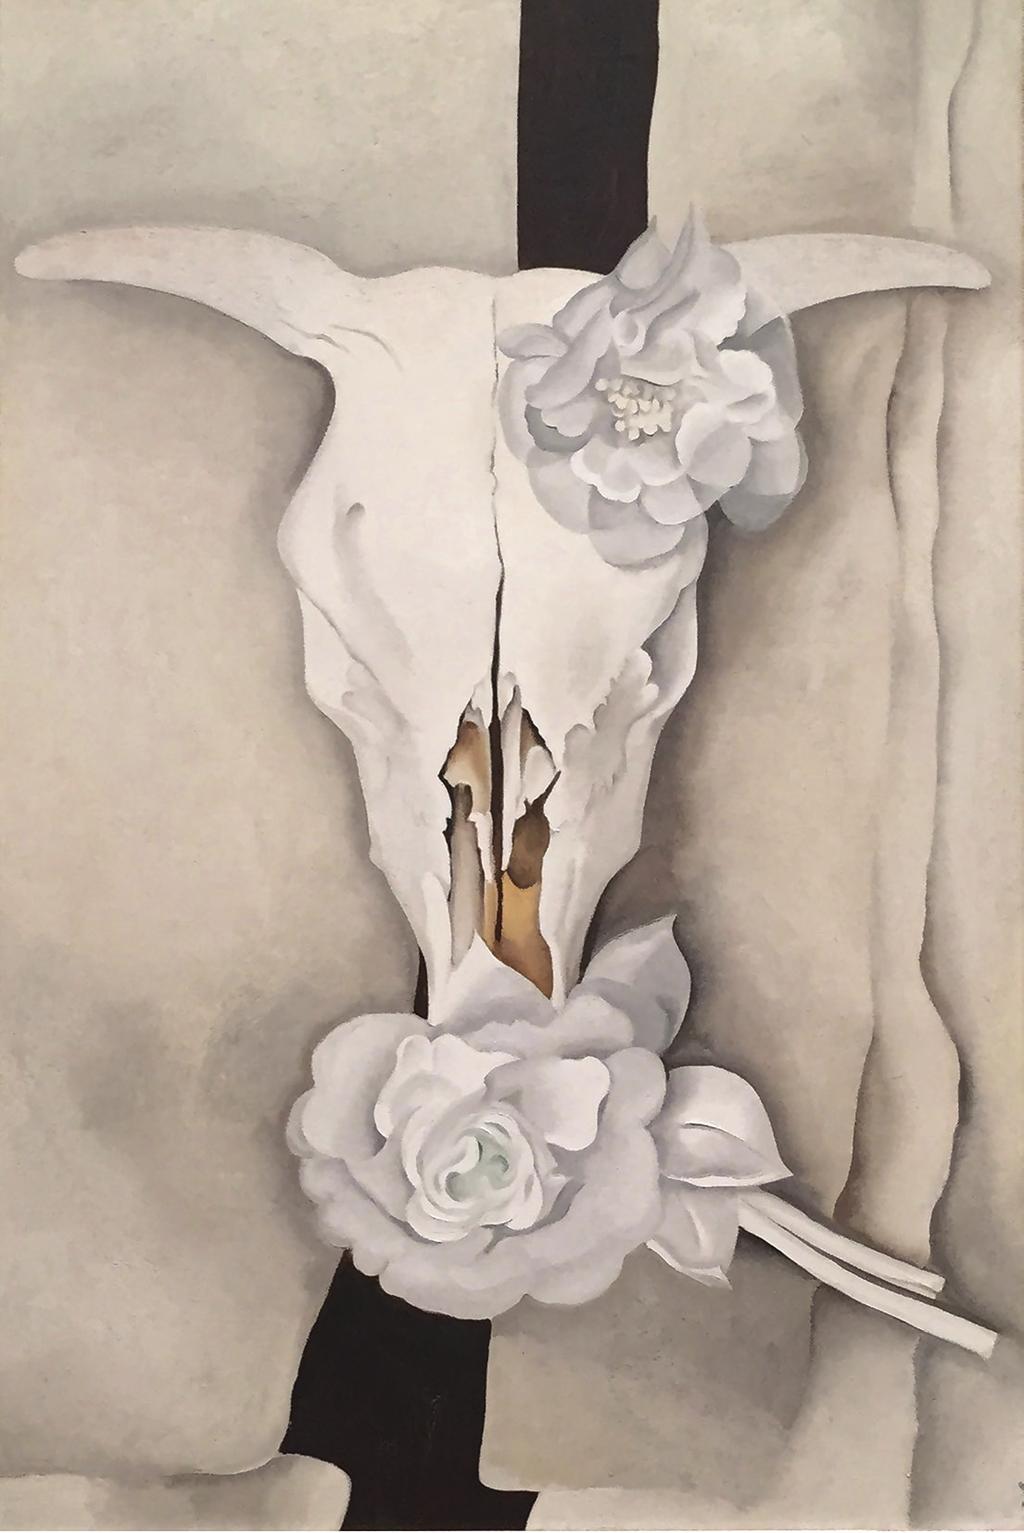 SECTION 1 EXPRESSIVE ART STUDIES (continued) Image for Question 2 Cow s Skull with Calico Roses (1931) by Georgia O Keeffe Oil on canvas (91 cm 61 cm) Question 2 With reference to the image